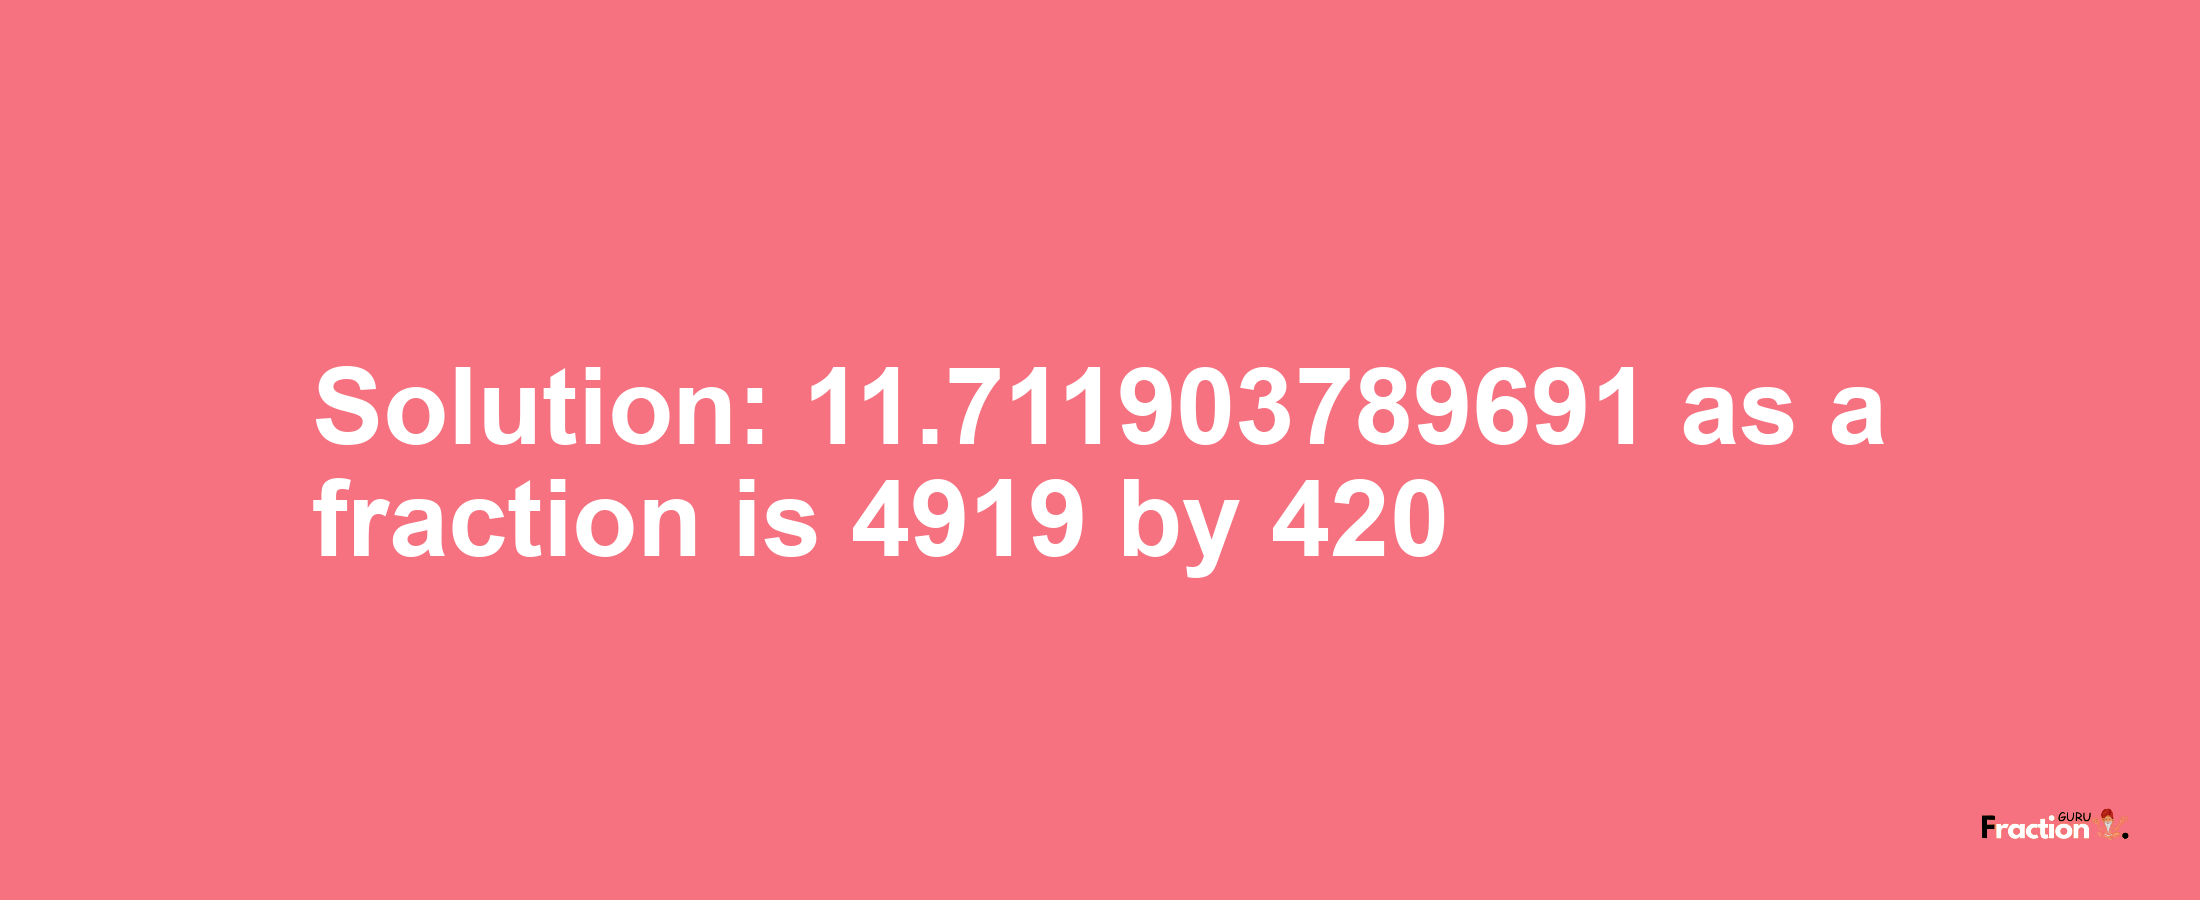 Solution:11.711903789691 as a fraction is 4919/420